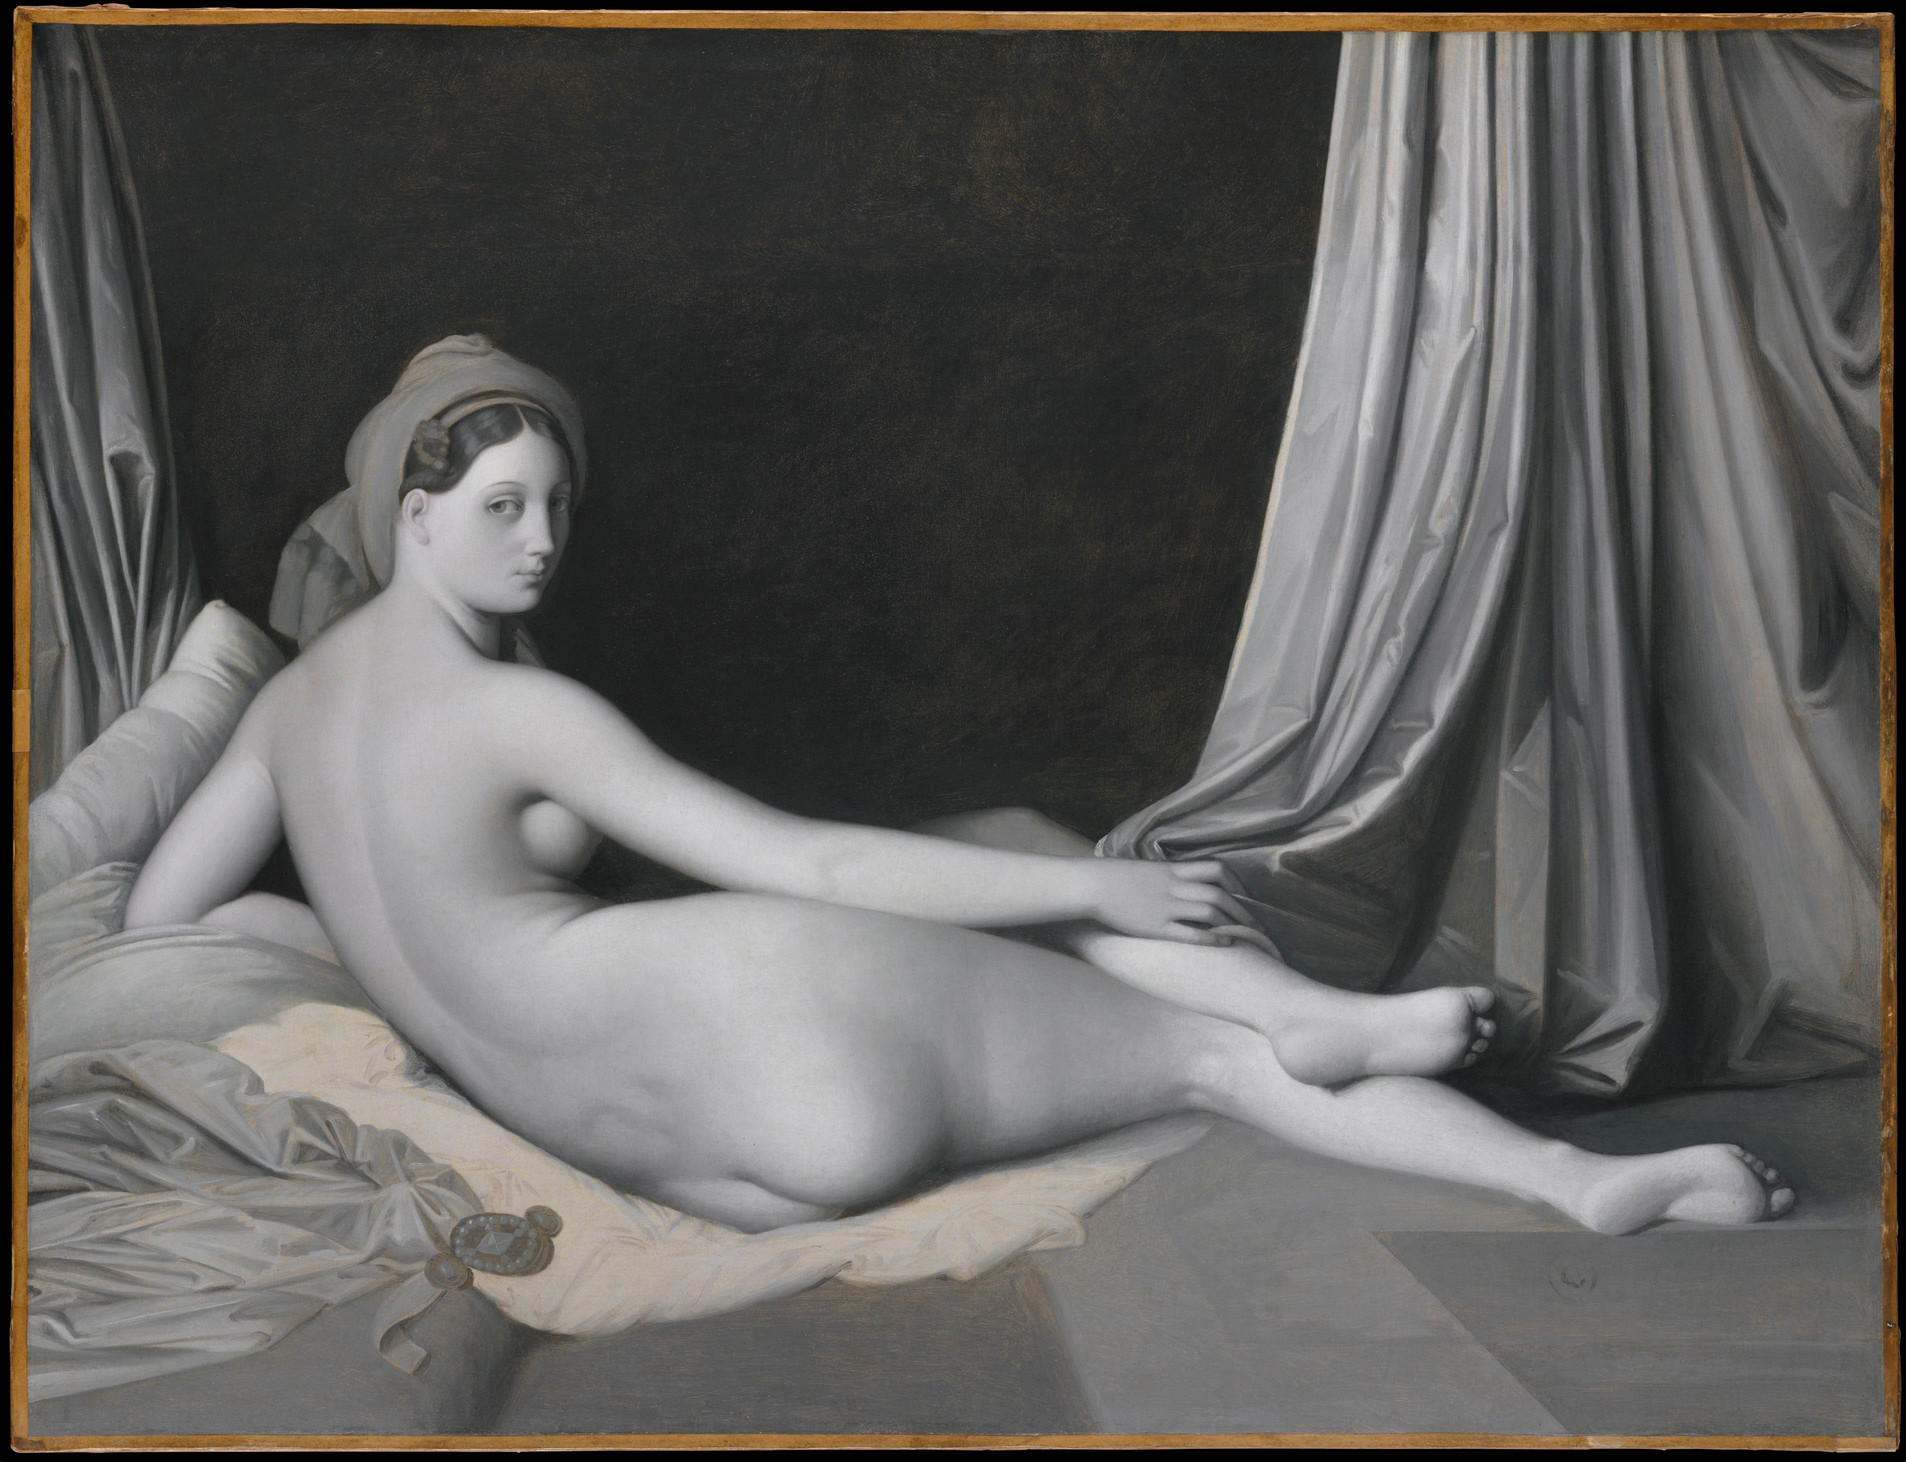 Jean-Auguste-Dominique Ingres and workshop Odalisque in Grisaille, about 1824-34 Oil on canvas, 83.2 × 109.2 cm The Metropolitan Museum of Art, New York, Catharine Lorillard Wolfe Collection, Wolfe Fund, 1938, 38.65 © The Metropolitan Museum of Art / Art Resource / Scala, Florence